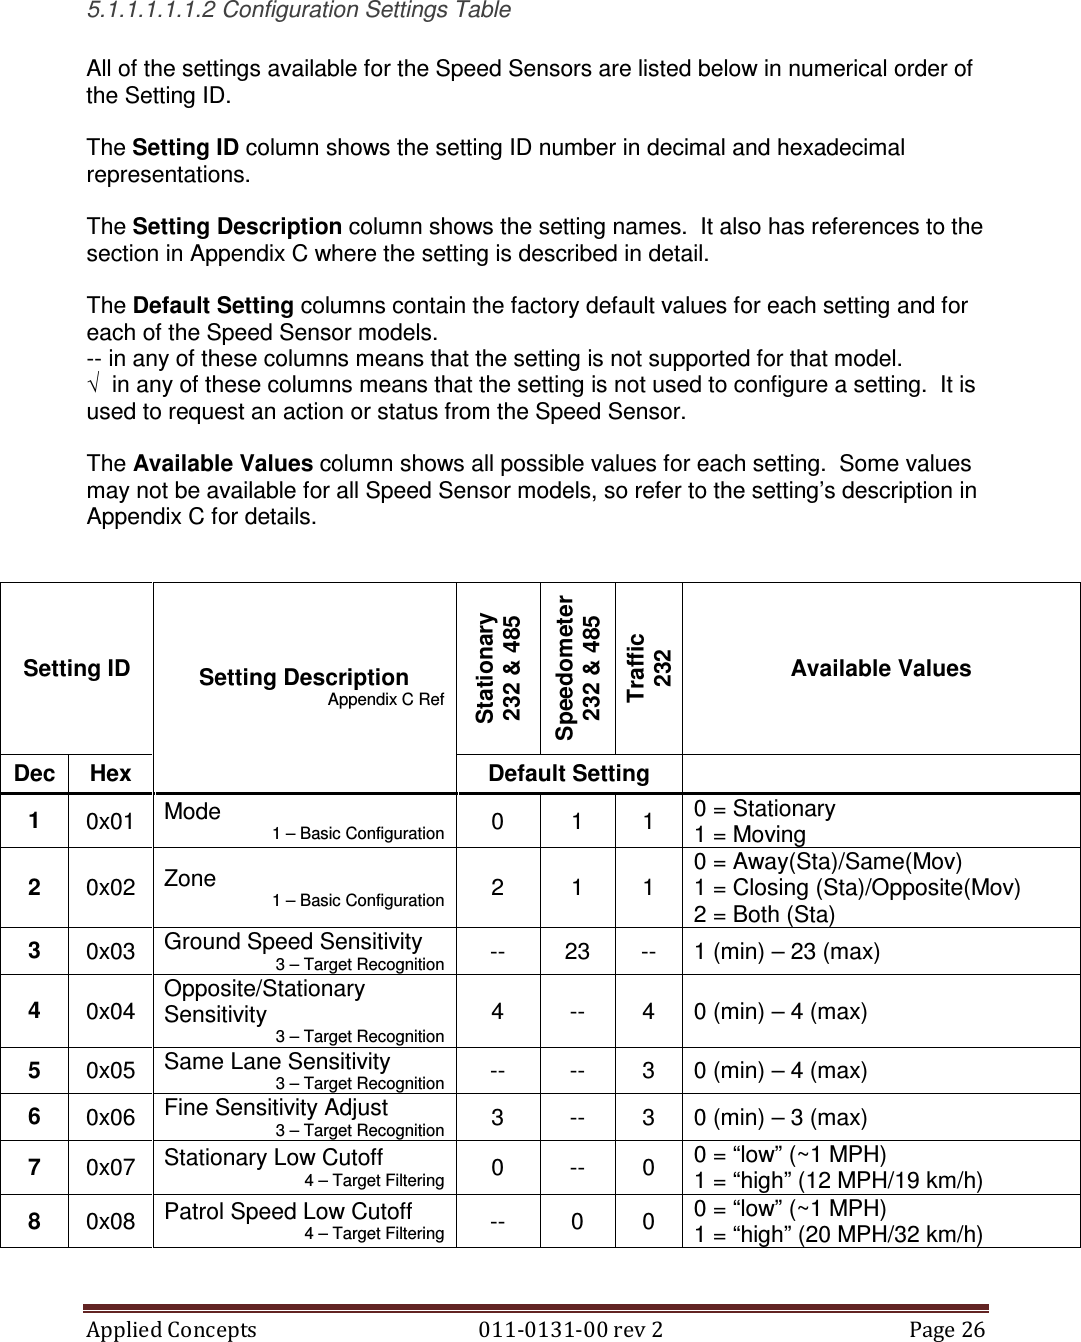 Applied Concepts                                            011-0131-00 rev 2  Page 26   5.1.1.1.1.1.2 Configuration Settings Table  All of the settings available for the Speed Sensors are listed below in numerical order of the Setting ID.  The Setting ID column shows the setting ID number in decimal and hexadecimal representations.  The Setting Description column shows the setting names.  It also has references to the section in Appendix C where the setting is described in detail.  The Default Setting columns contain the factory default values for each setting and for each of the Speed Sensor models. -- in any of these columns means that the setting is not supported for that model. √  in any of these columns means that the setting is not used to configure a setting.  It is used to request an action or status from the Speed Sensor.  The Available Values column shows all possible values for each setting.  Some values may not be available for all Speed Sensor models, so refer to the setting’s description in Appendix C for details.   Setting ID Stationary 232 &amp; 485 Speedometer 232 &amp; 485 Traffic 232 Available Values Dec  Hex Setting Description Appendix C Ref Default Setting   1  0x01  Mode 1 – Basic Configuration 0  1  1  0 = Stationary 1 = Moving 2  0x02  Zone 1 – Basic Configuration 2  1  1 0 = Away(Sta)/Same(Mov) 1 = Closing (Sta)/Opposite(Mov) 2 = Both (Sta) 3  0x03  Ground Speed Sensitivity 3 – Target Recognition --  23  --  1 (min) – 23 (max) 4  0x04 Opposite/Stationary Sensitivity 3 – Target Recognition 4  --  4  0 (min) – 4 (max) 5  0x05  Same Lane Sensitivity 3 – Target Recognition --  --  3  0 (min) – 4 (max) 6  0x06  Fine Sensitivity Adjust 3 – Target Recognition 3  --  3  0 (min) – 3 (max) 7  0x07  Stationary Low Cutoff 4 – Target Filtering 0  --  0  0 = “low” (~1 MPH) 1 = “high” (12 MPH/19 km/h) 8  0x08  Patrol Speed Low Cutoff 4 – Target Filtering --  0  0  0 = “low” (~1 MPH) 1 = “high” (20 MPH/32 km/h) 